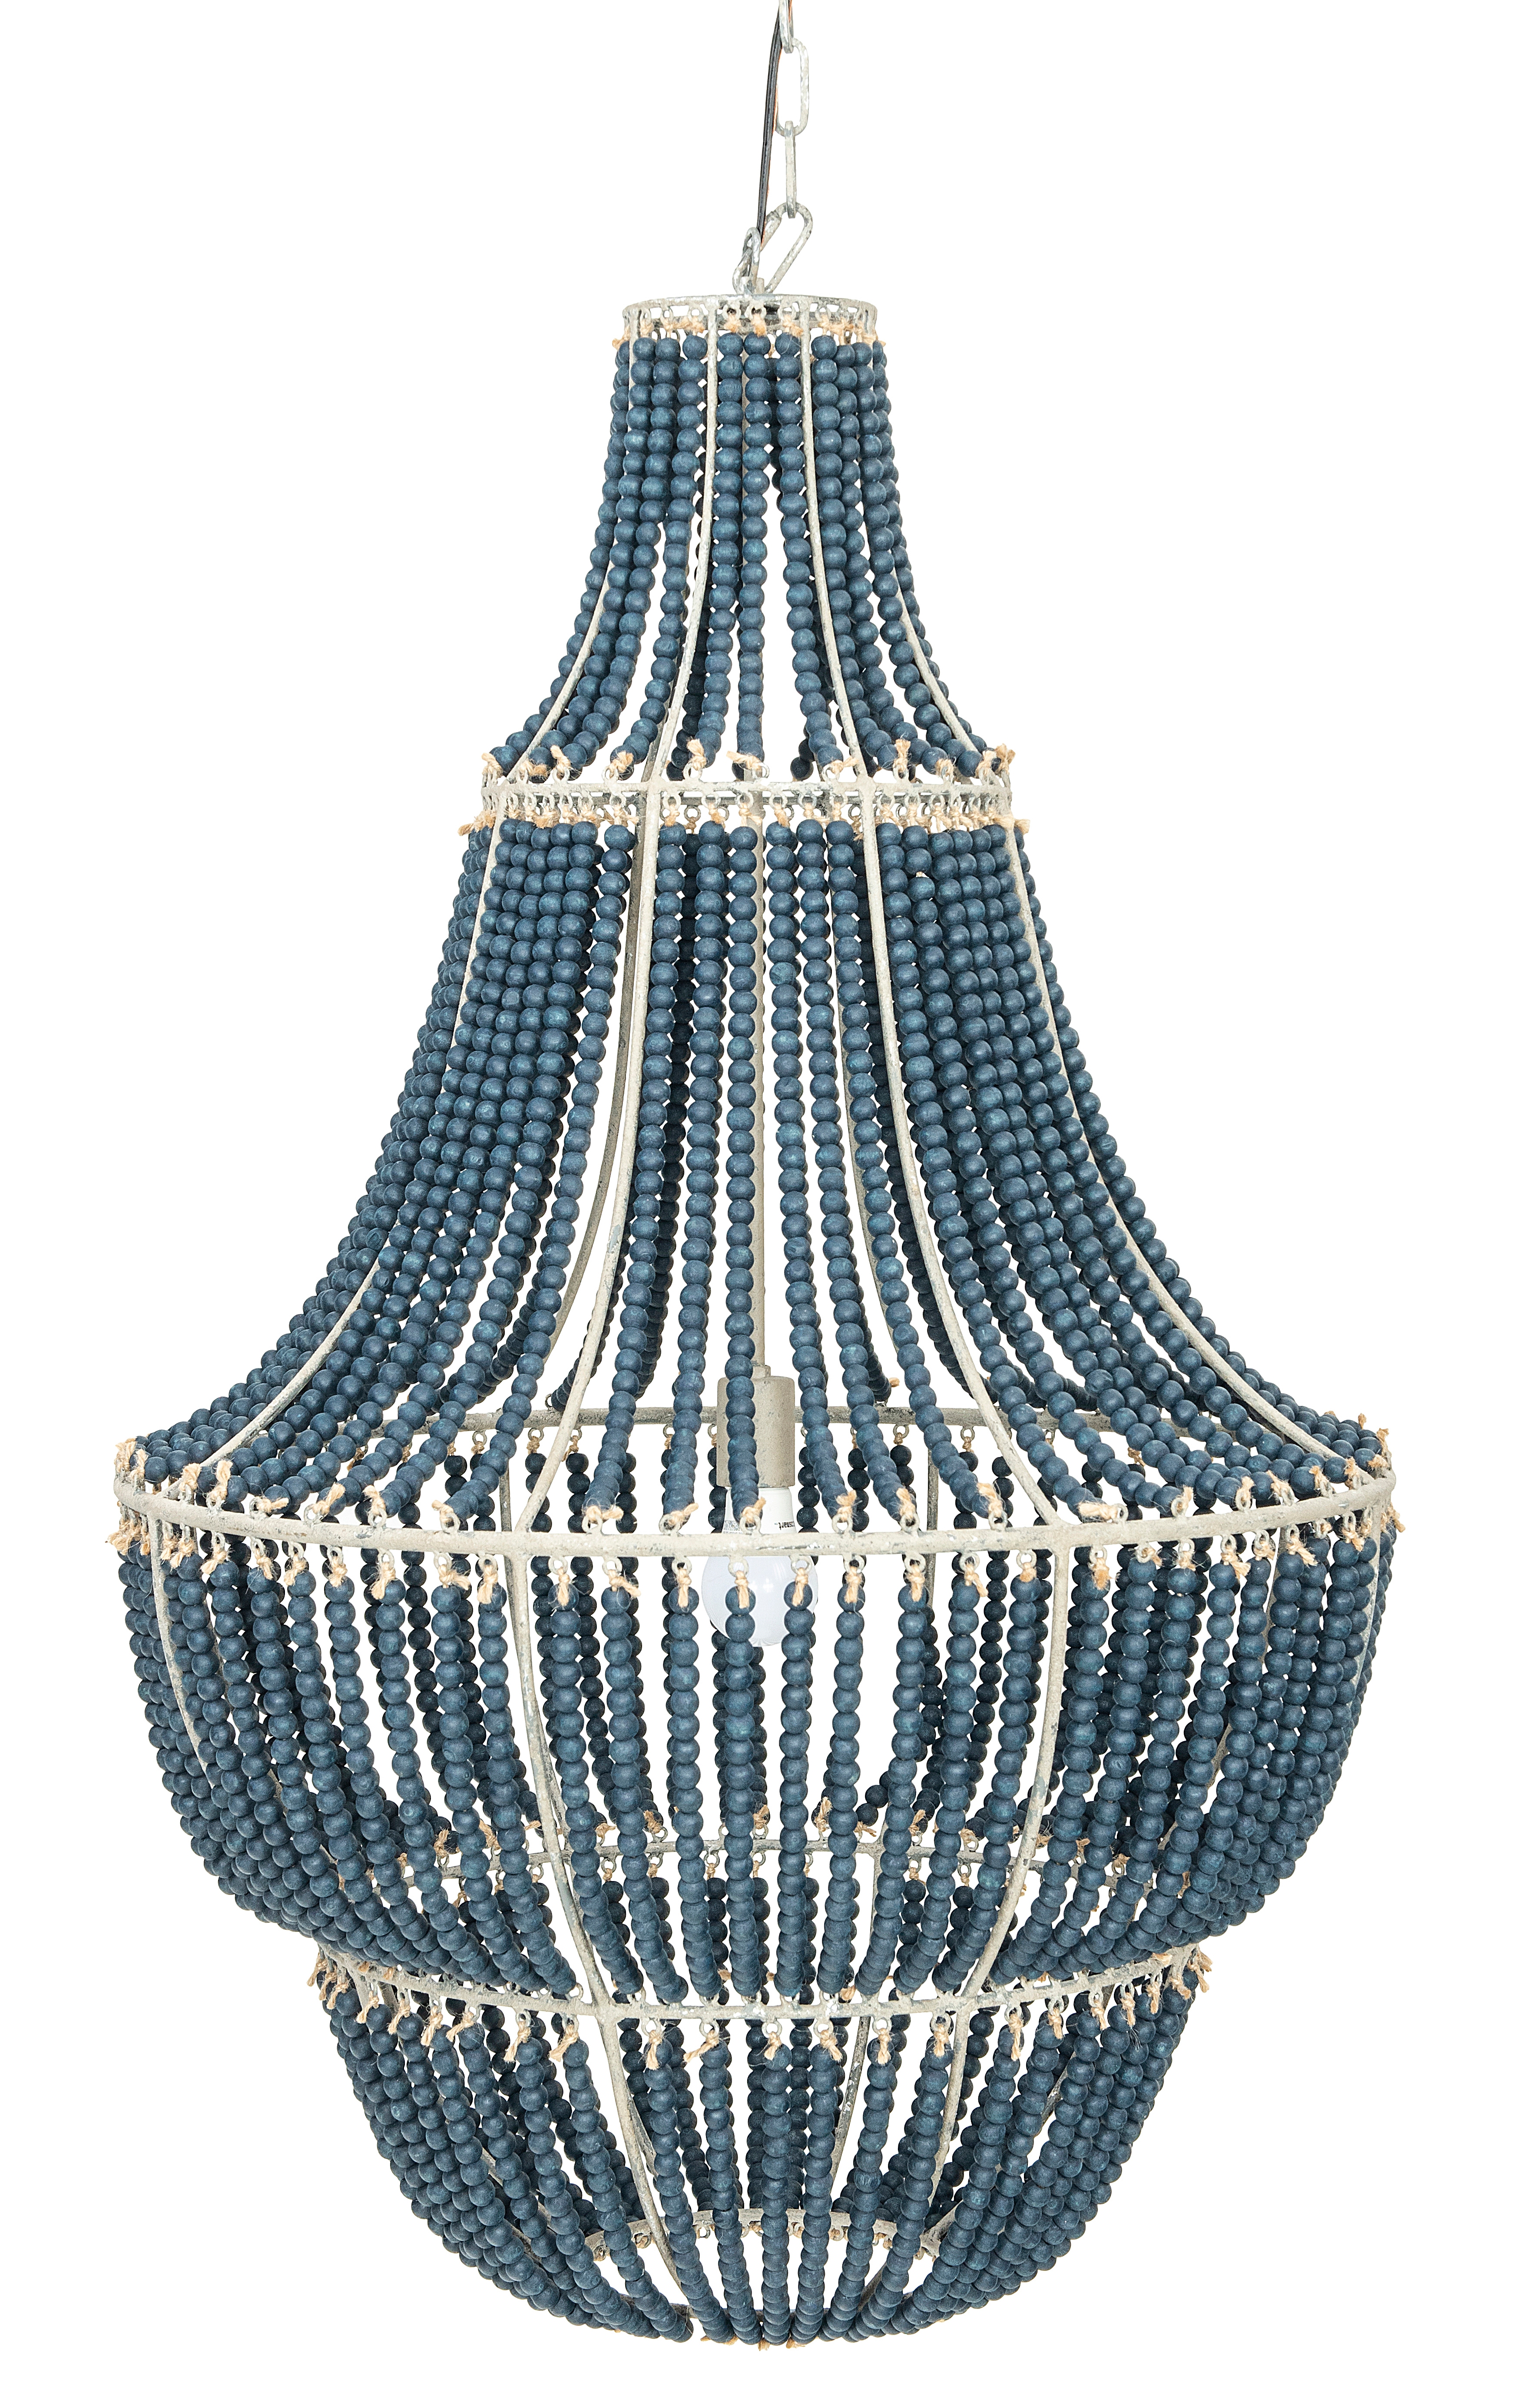 Metal Chandelier with Wood Beads - Image 0